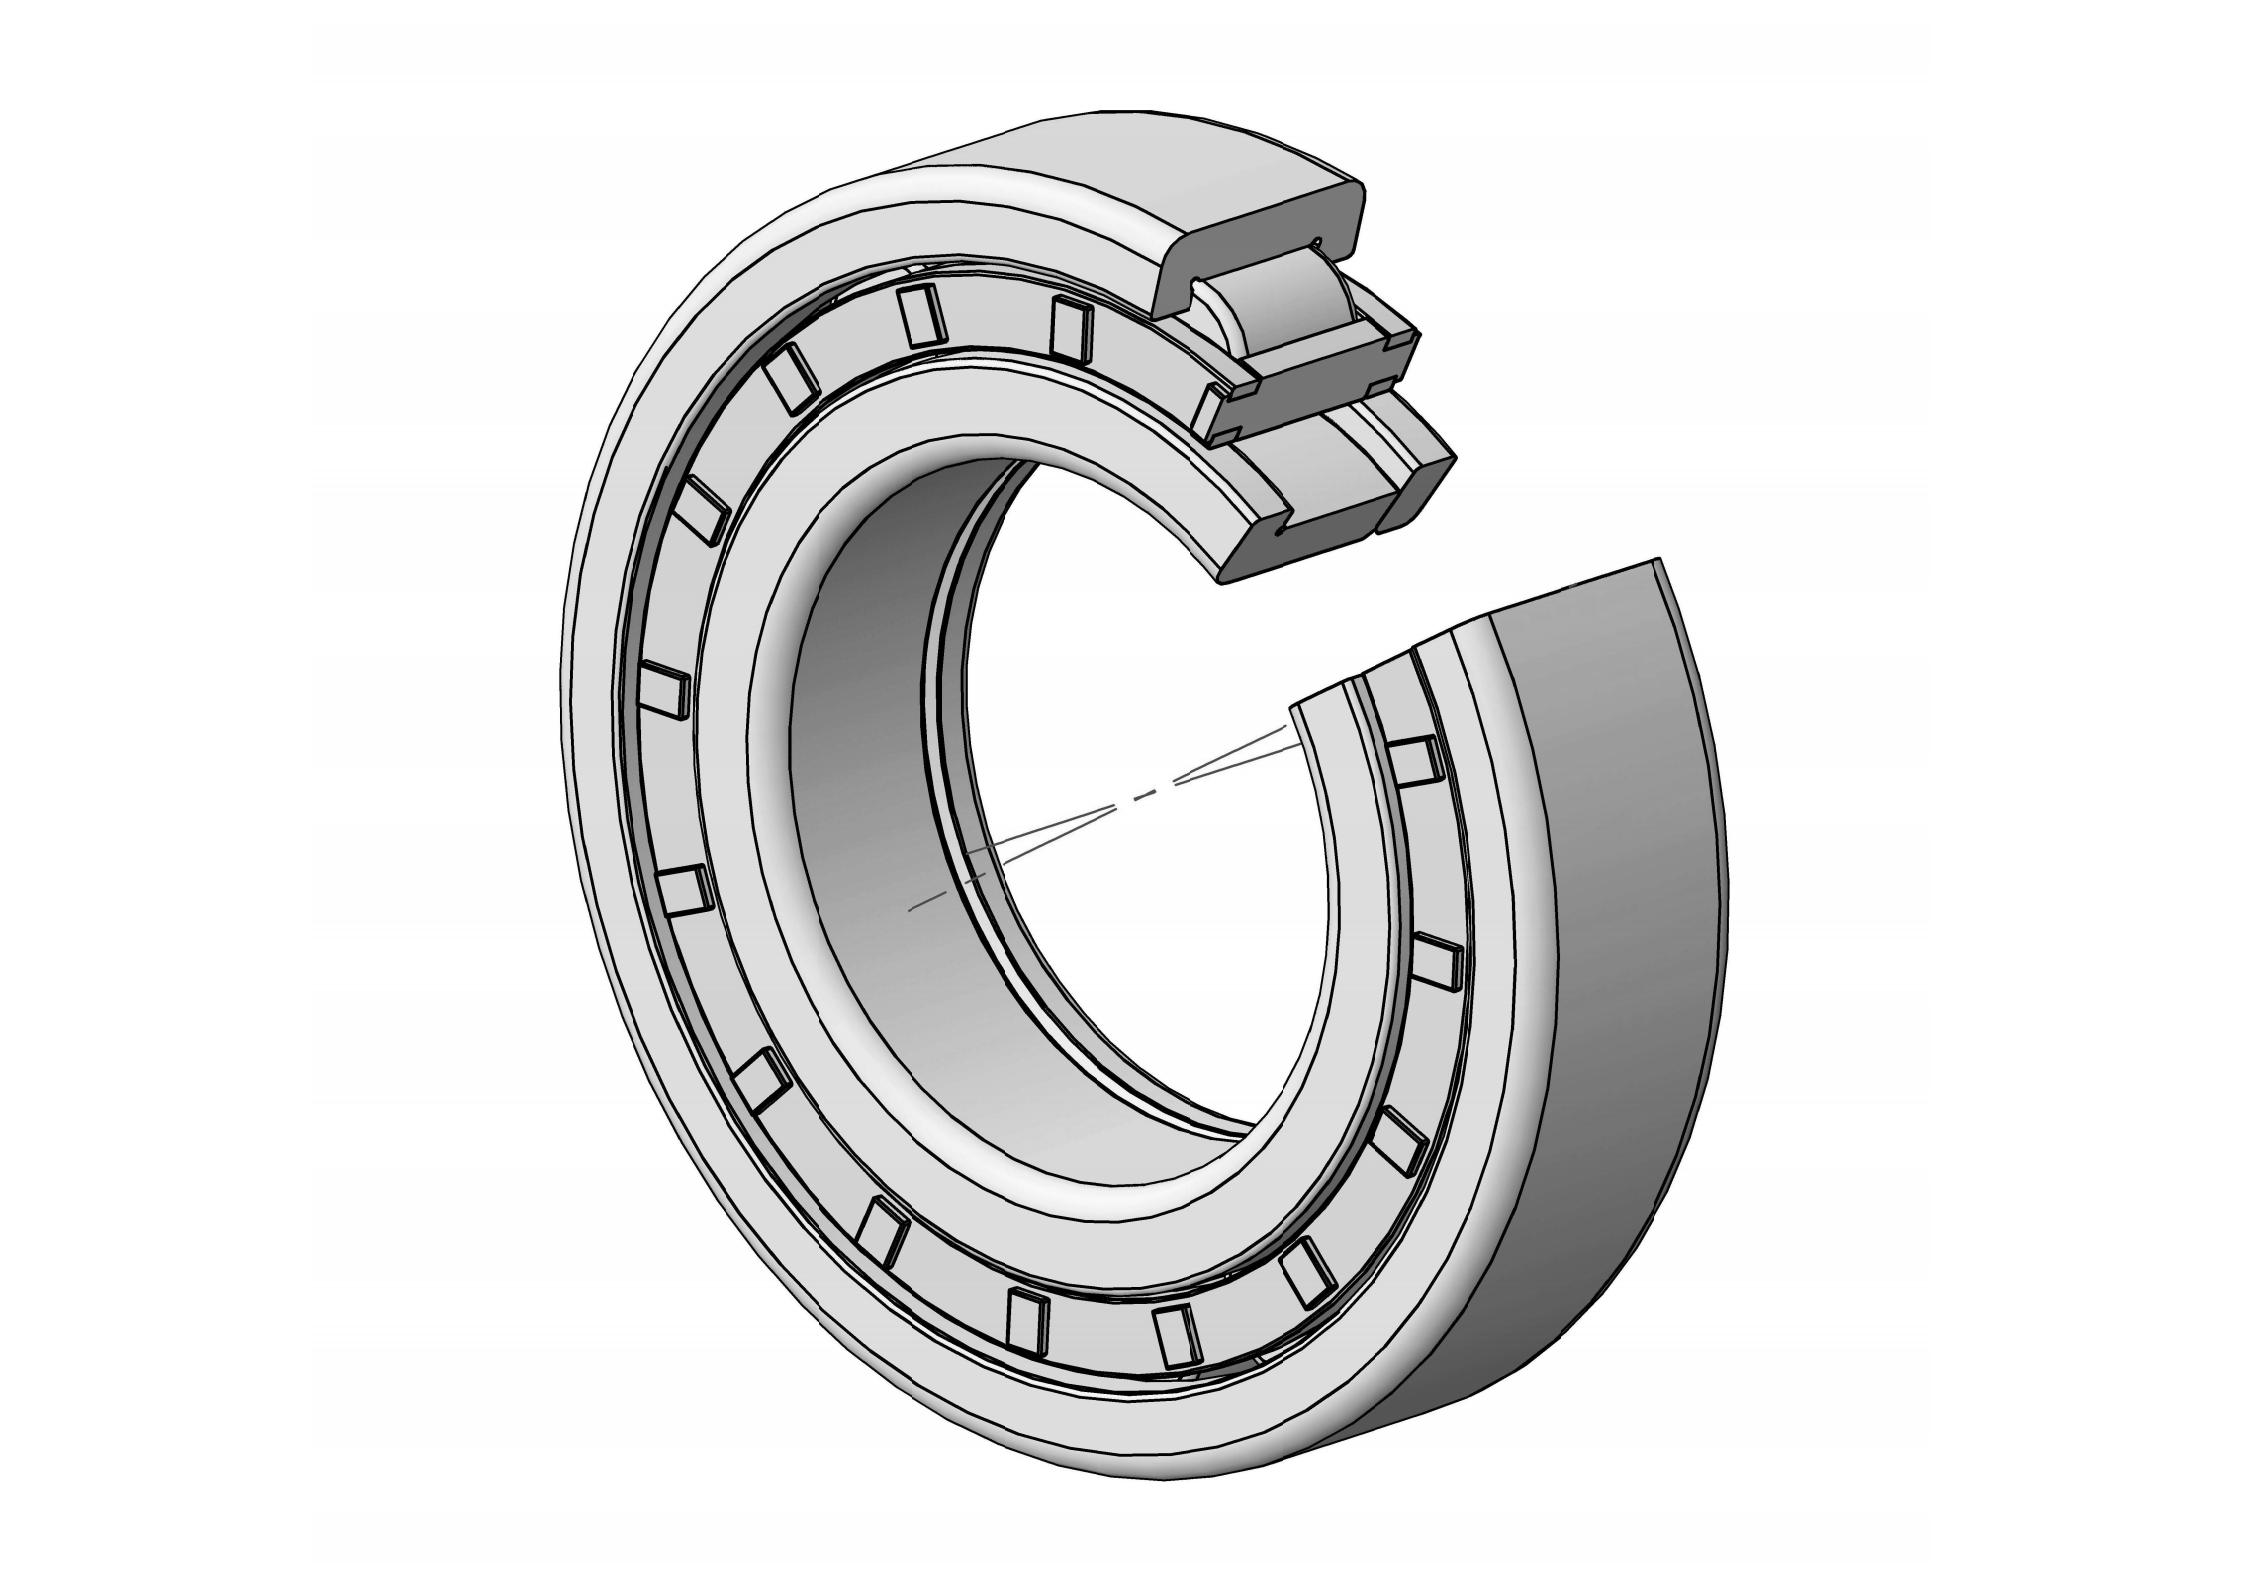 NUP2305-E Single Row Cylindrical roller bearing 